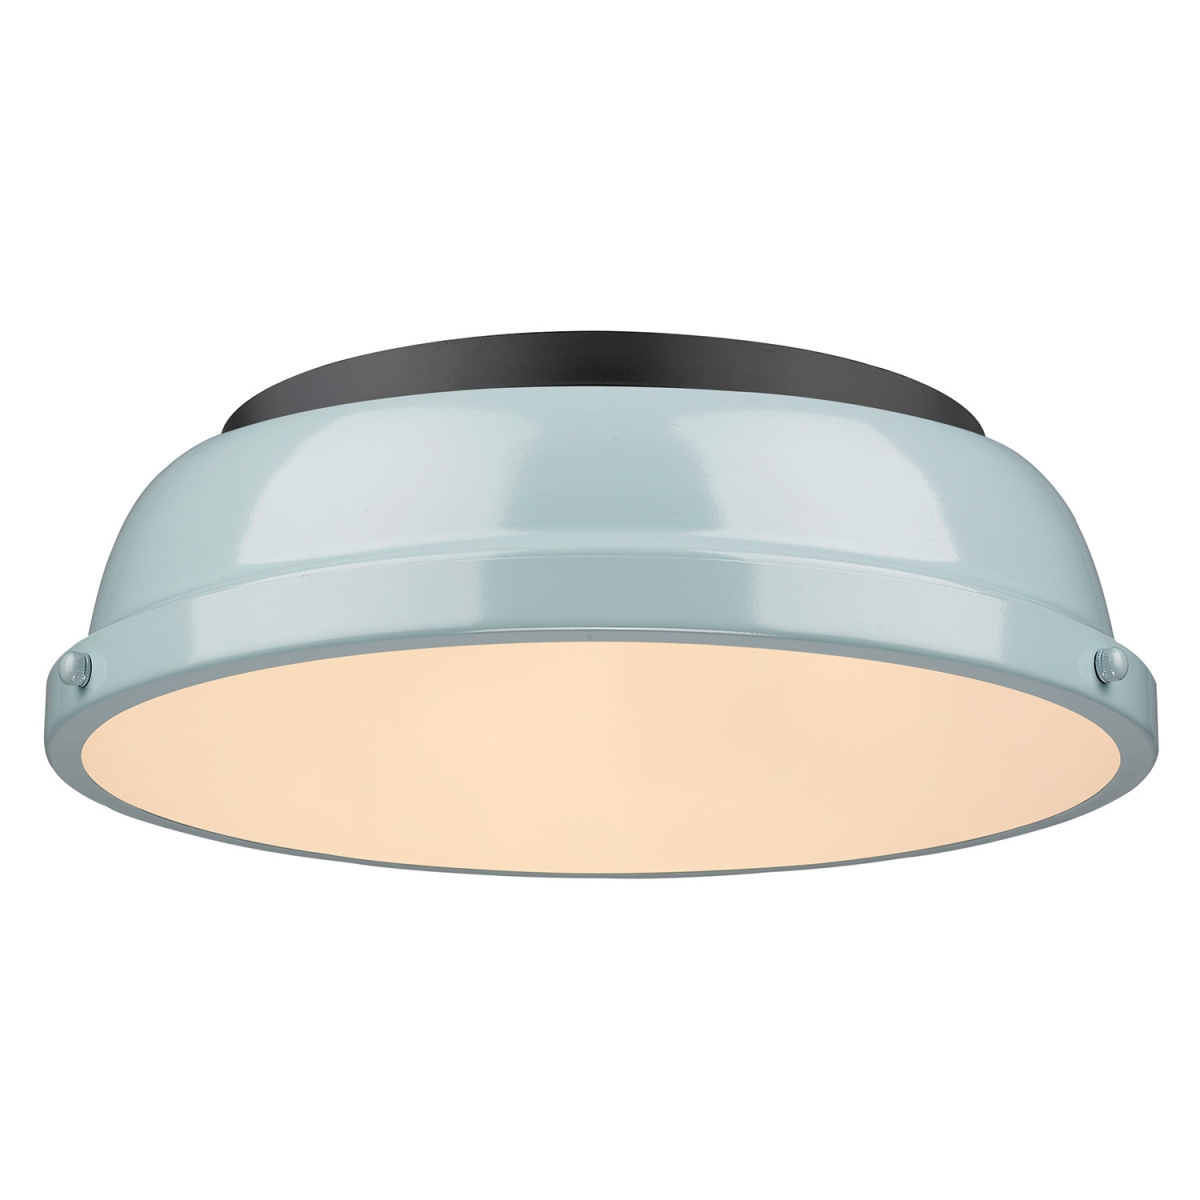 3602-14 Blk-sf Duncan 14 In. Flush Mount Light With Seafoam Shade, Black